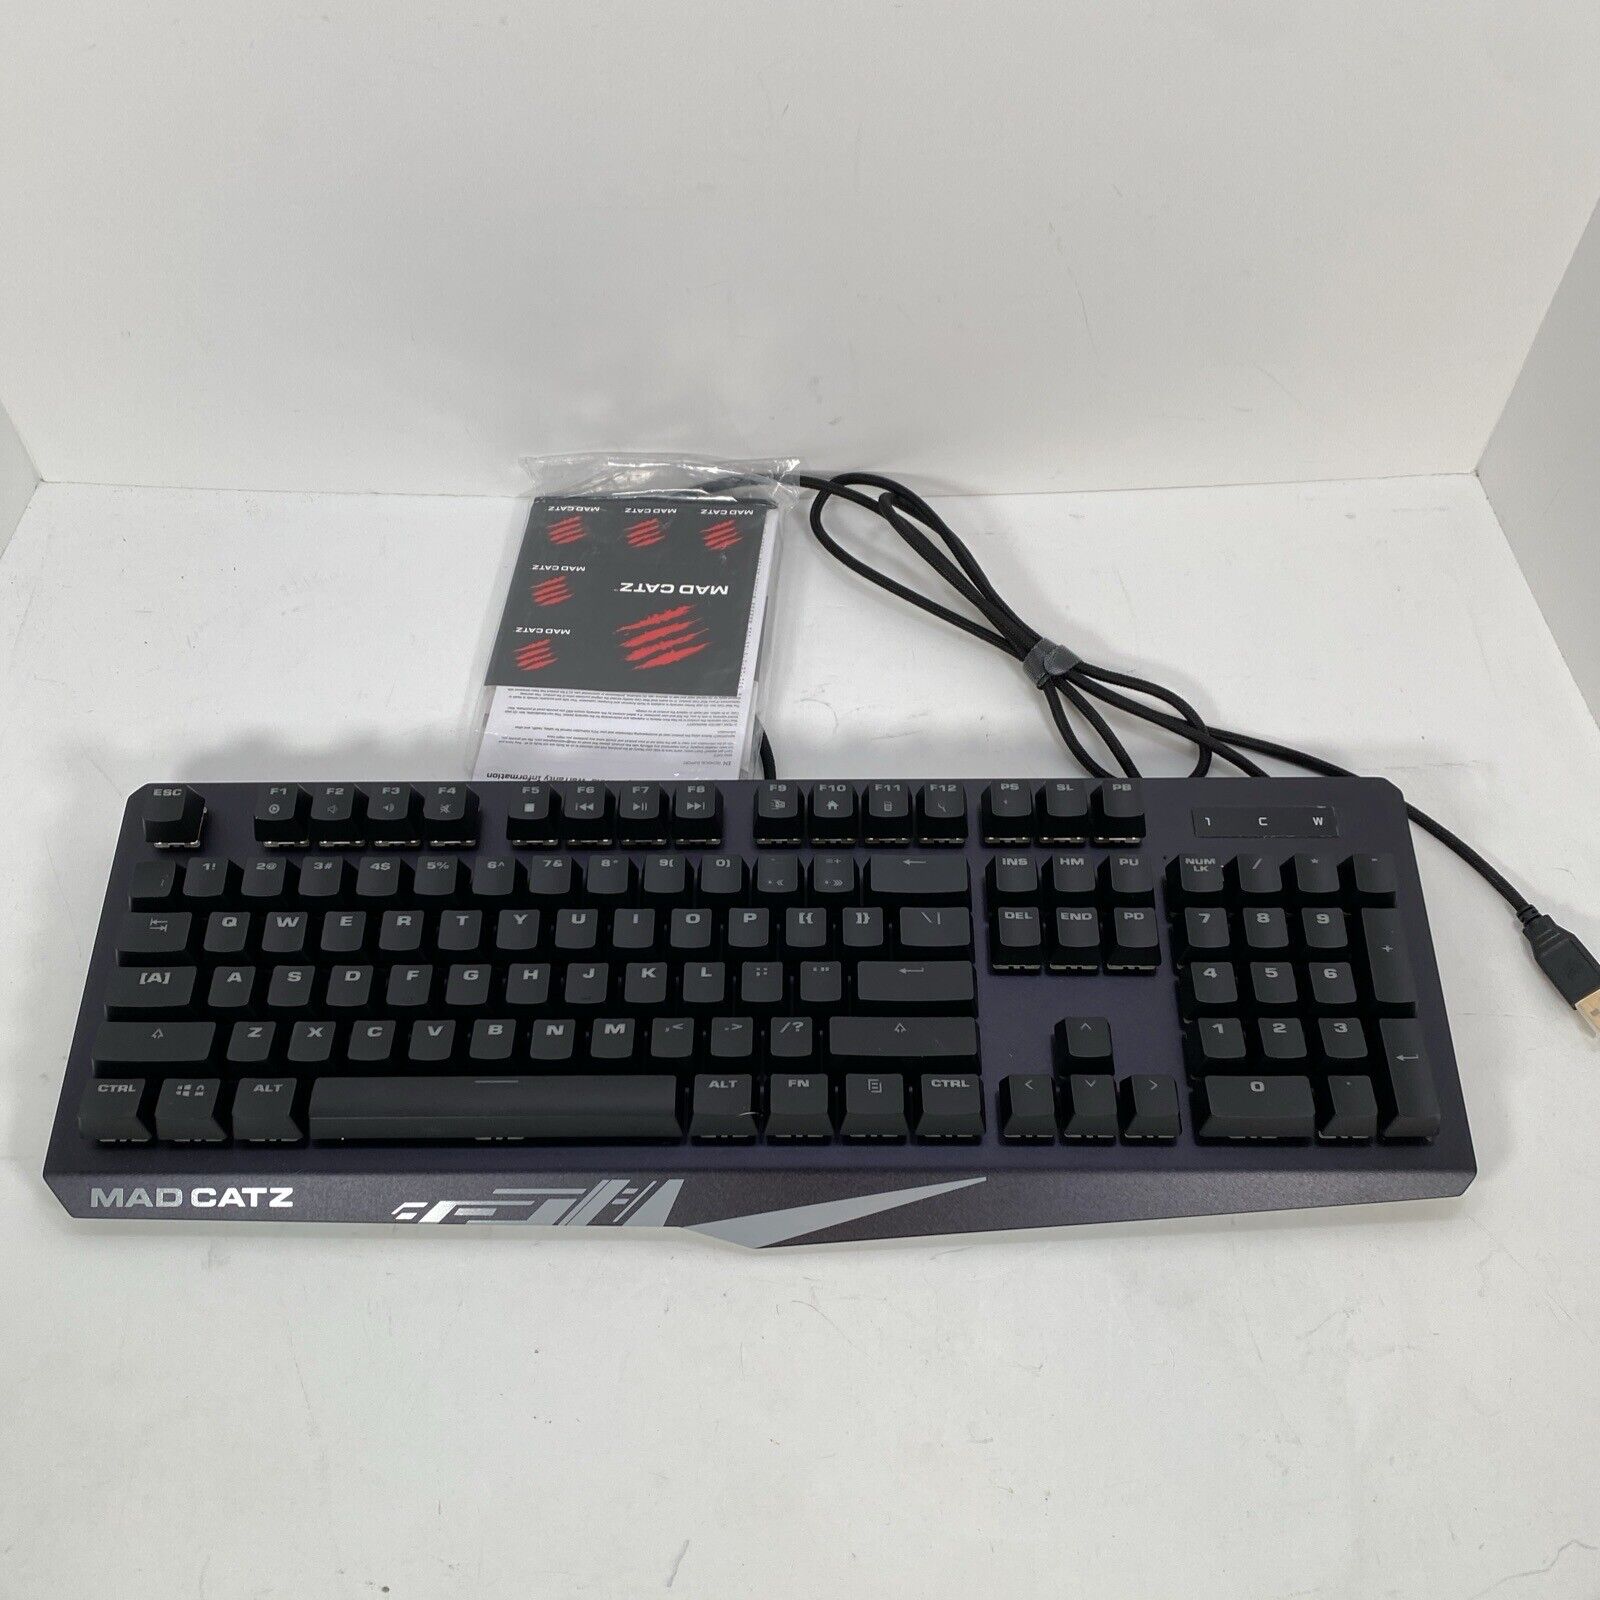 Mad Catz Gaming Keyboard S.T.R.I.K.E. 4 STRIKE 4 - Tested And Works